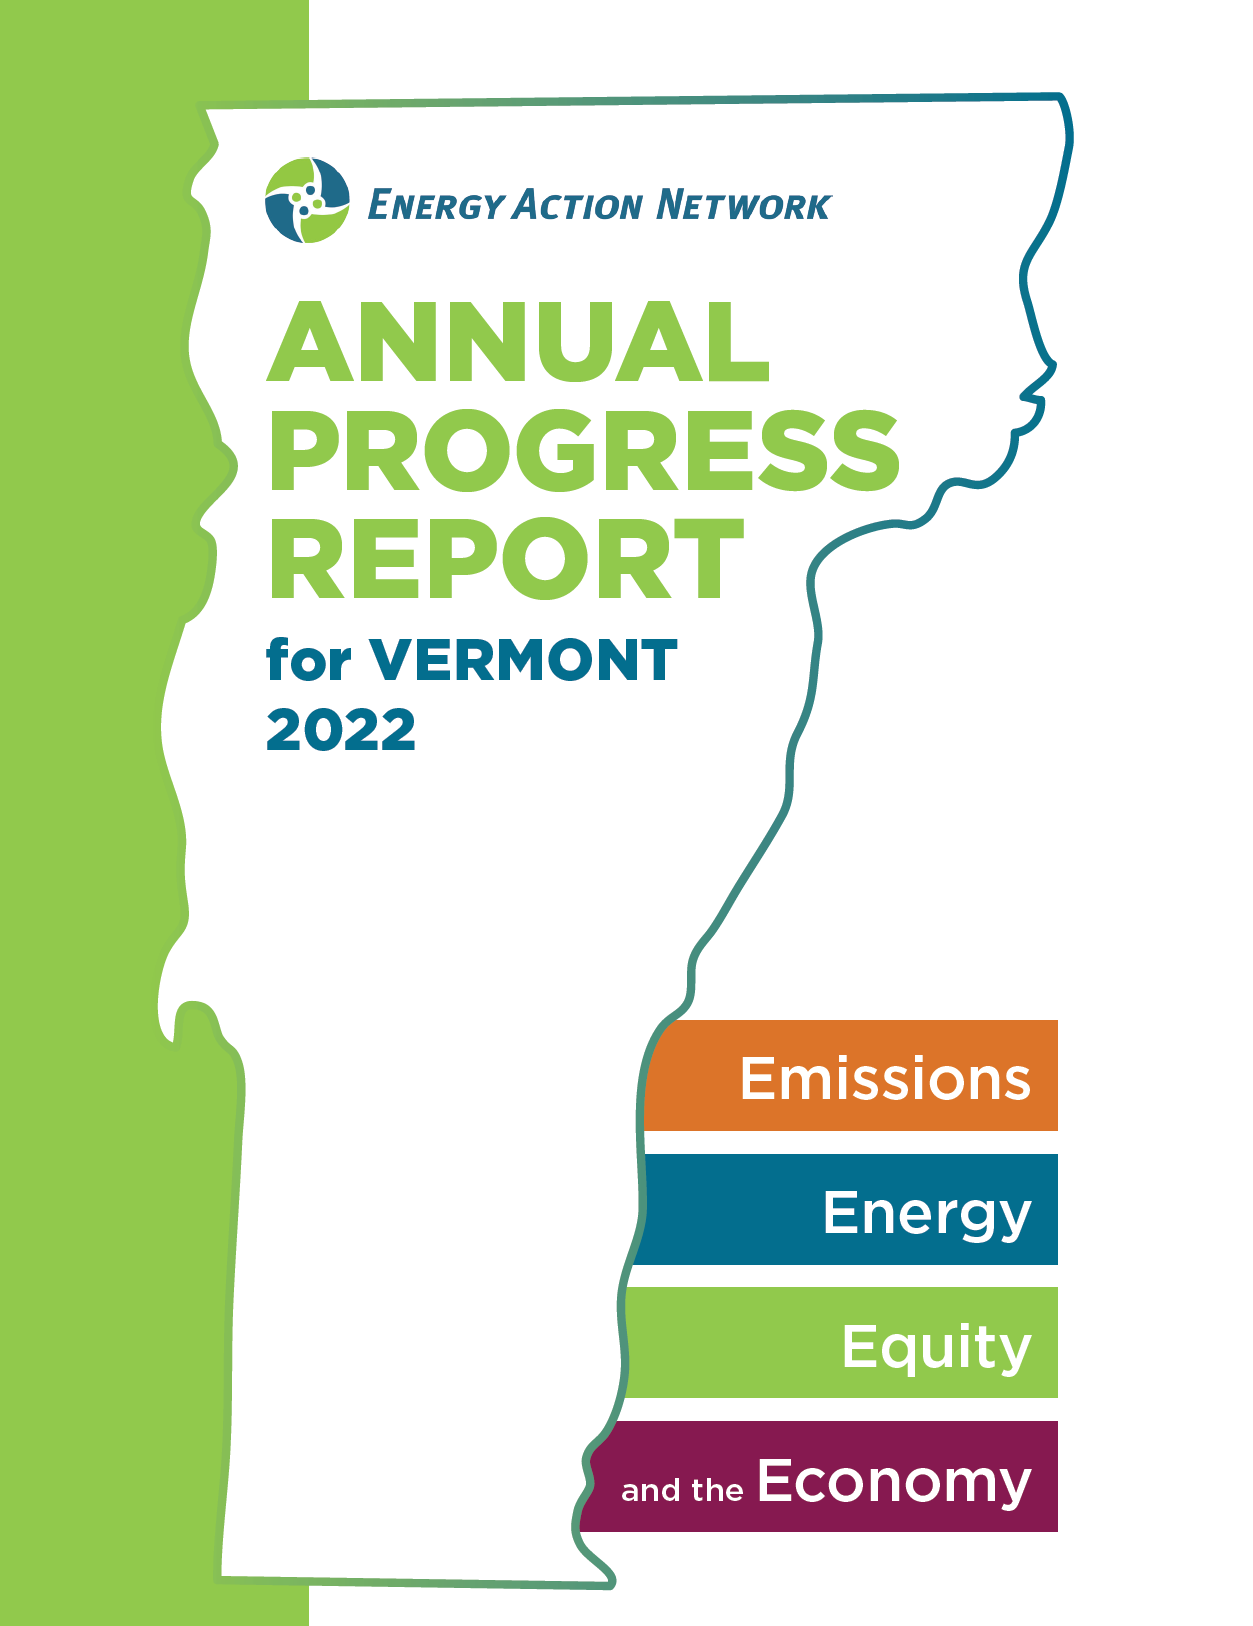 2022 Annual Progress Report for Vermont on Emissions, Energy Equity and the Economy